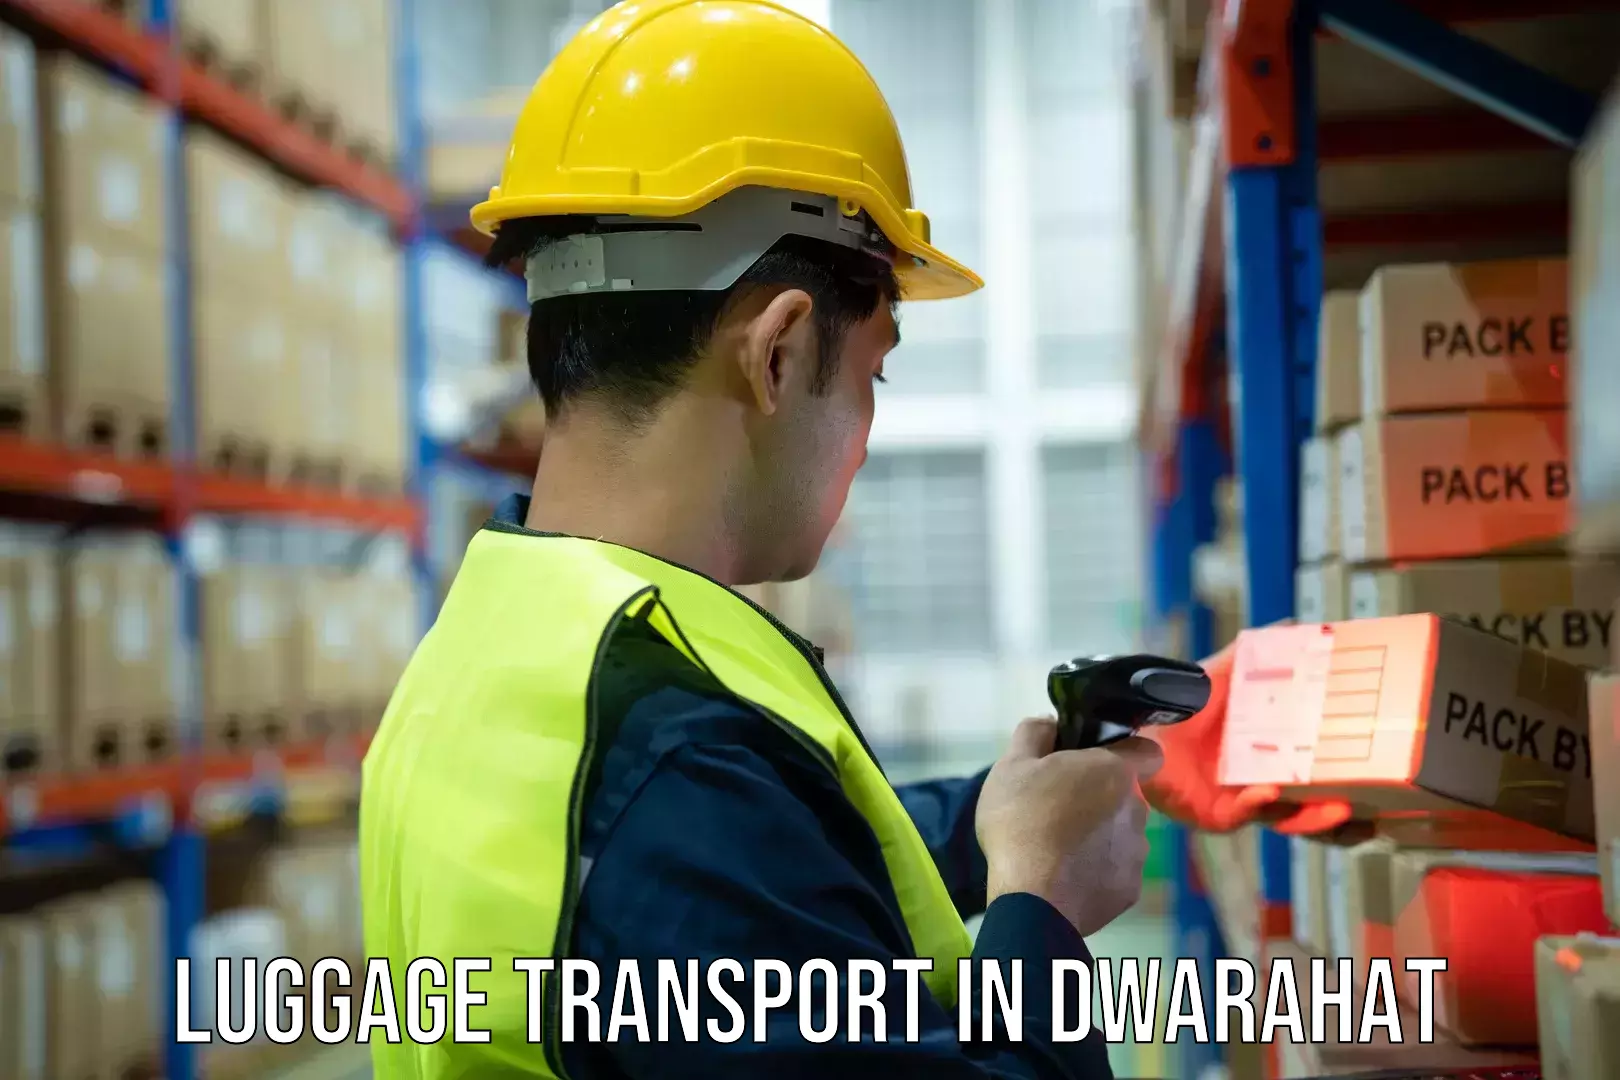 Luggage delivery operations in Dwarahat